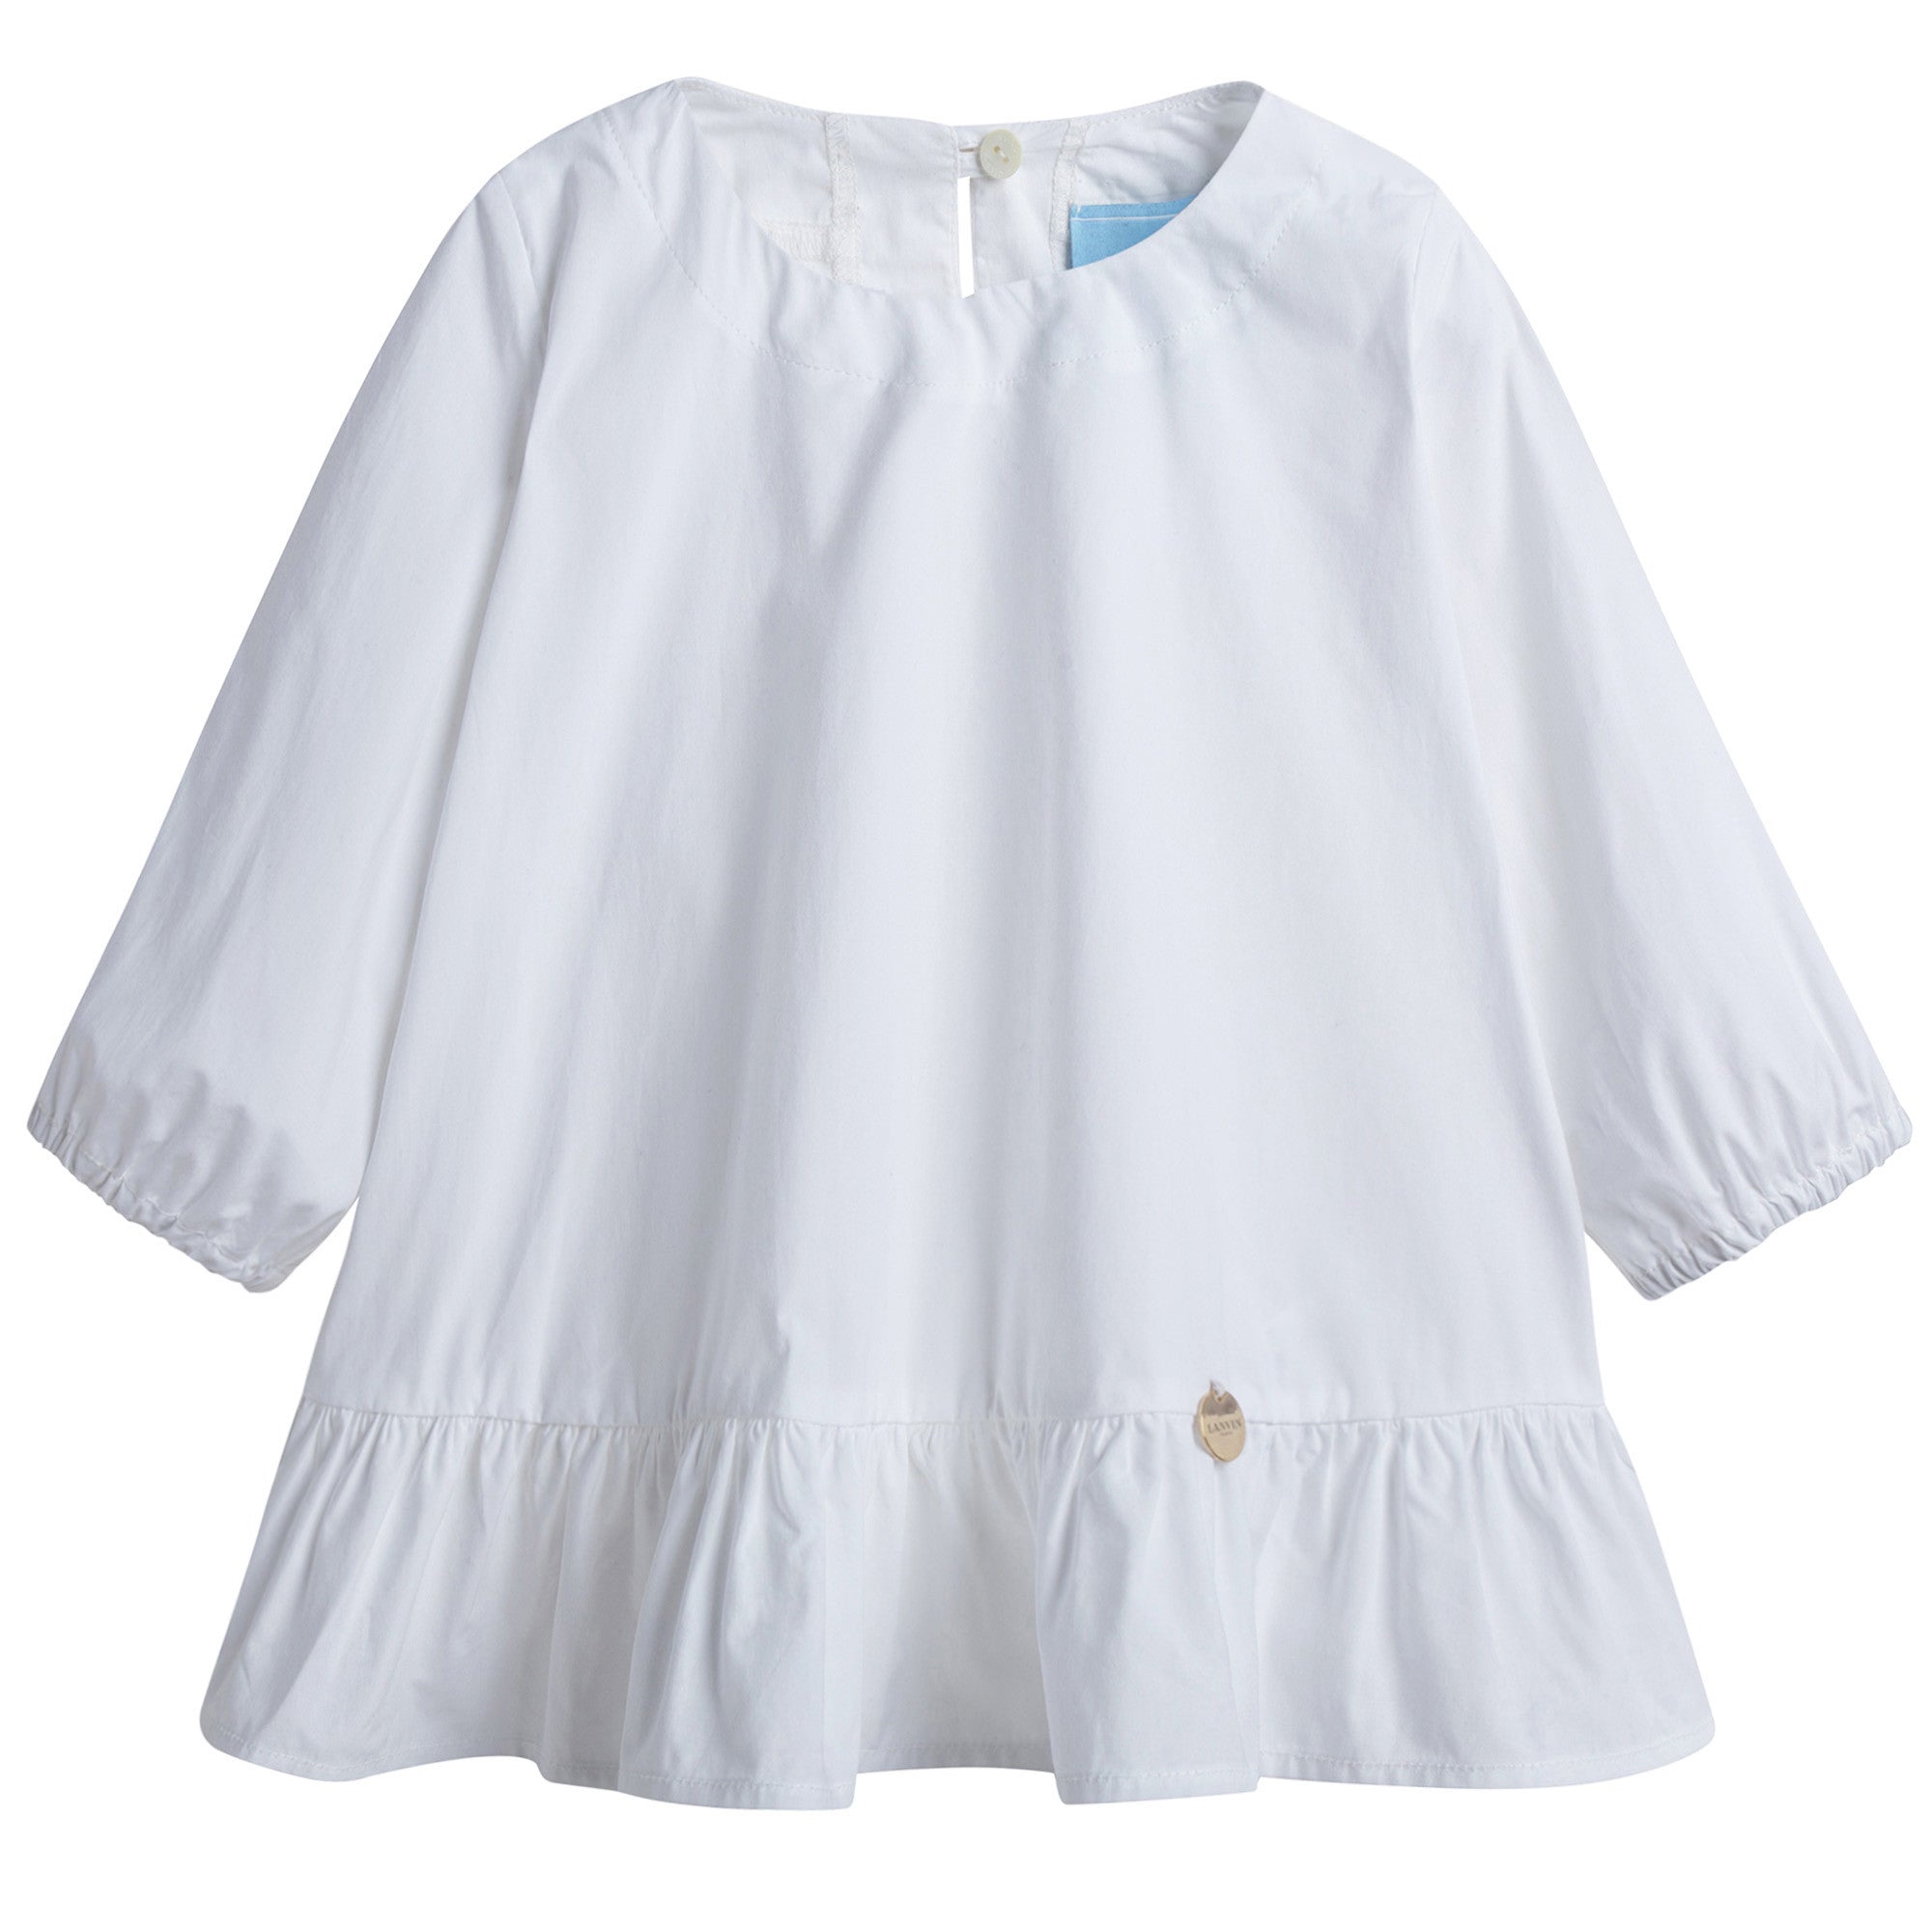 Girls White Cotton Top With Flounces